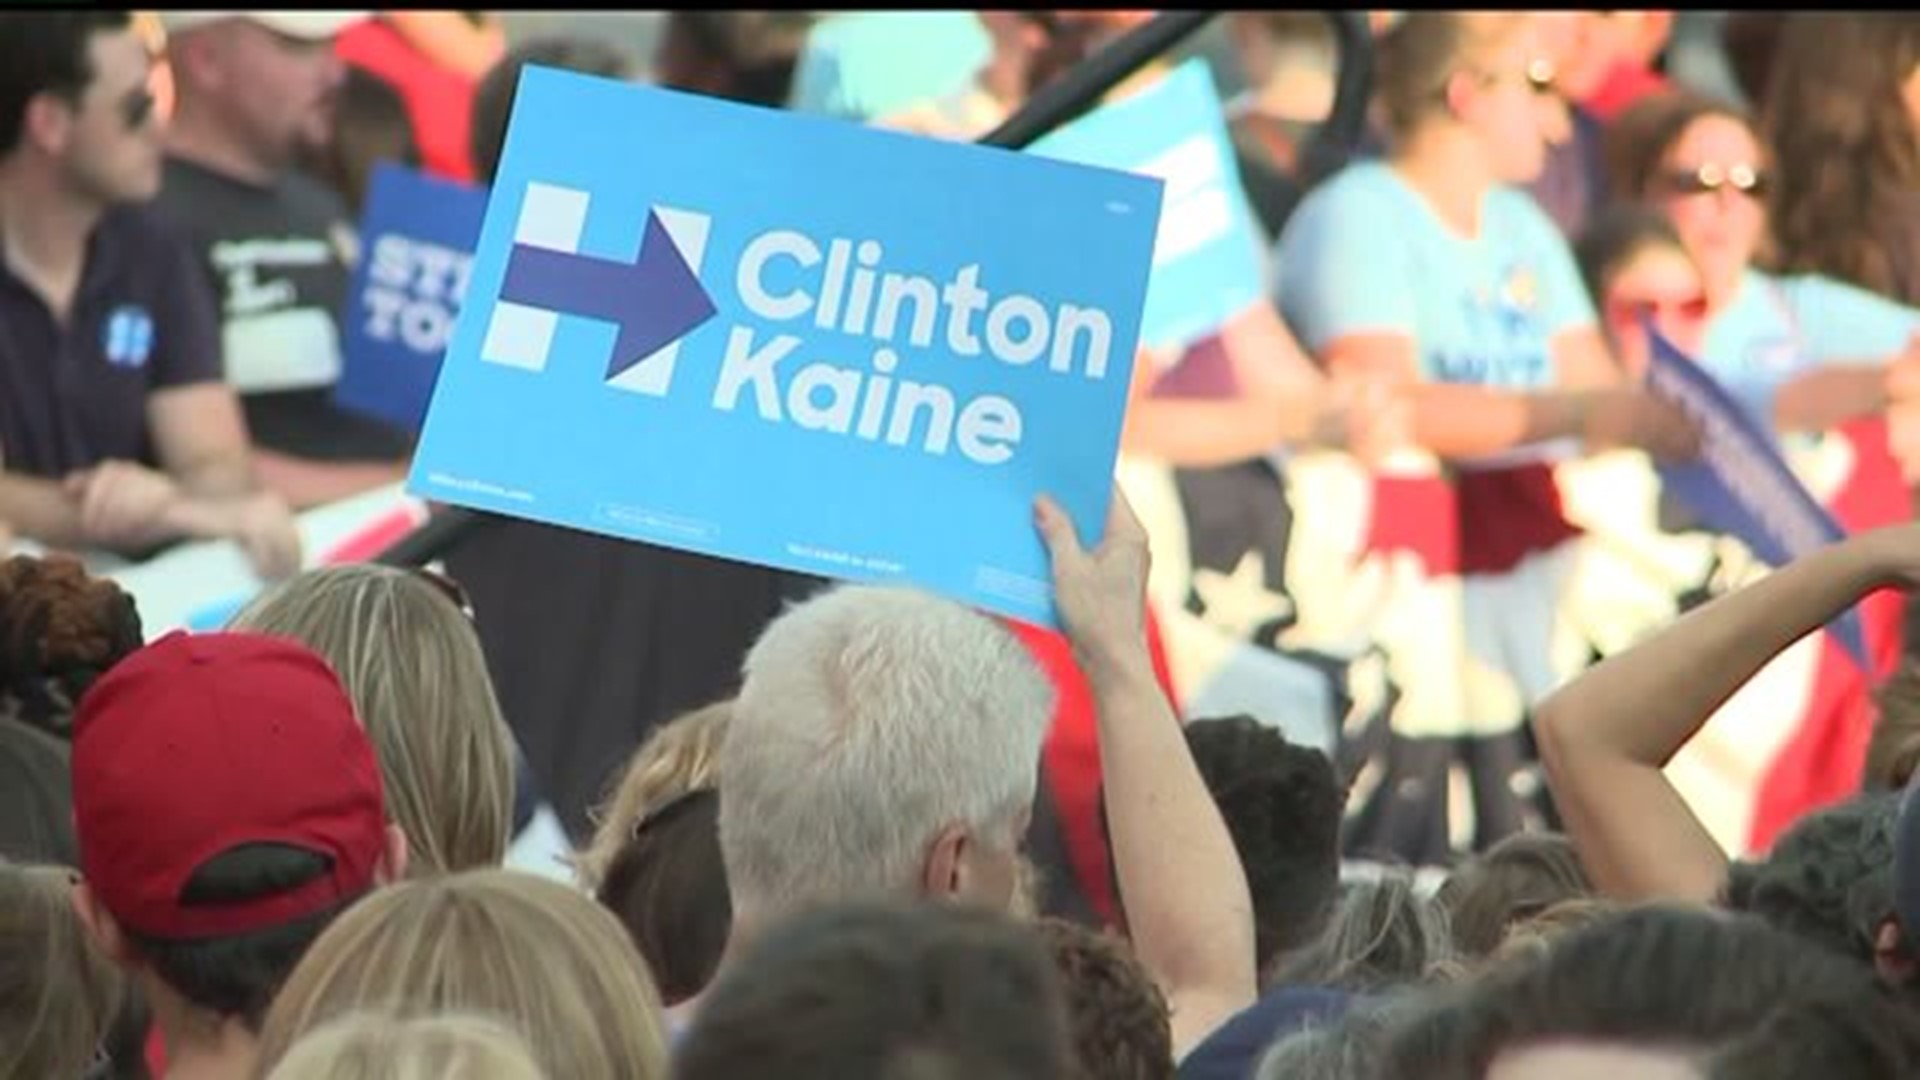 Democratic Presidential nominee Hillary Clinton to attend an event in Harrisburg this afternoon